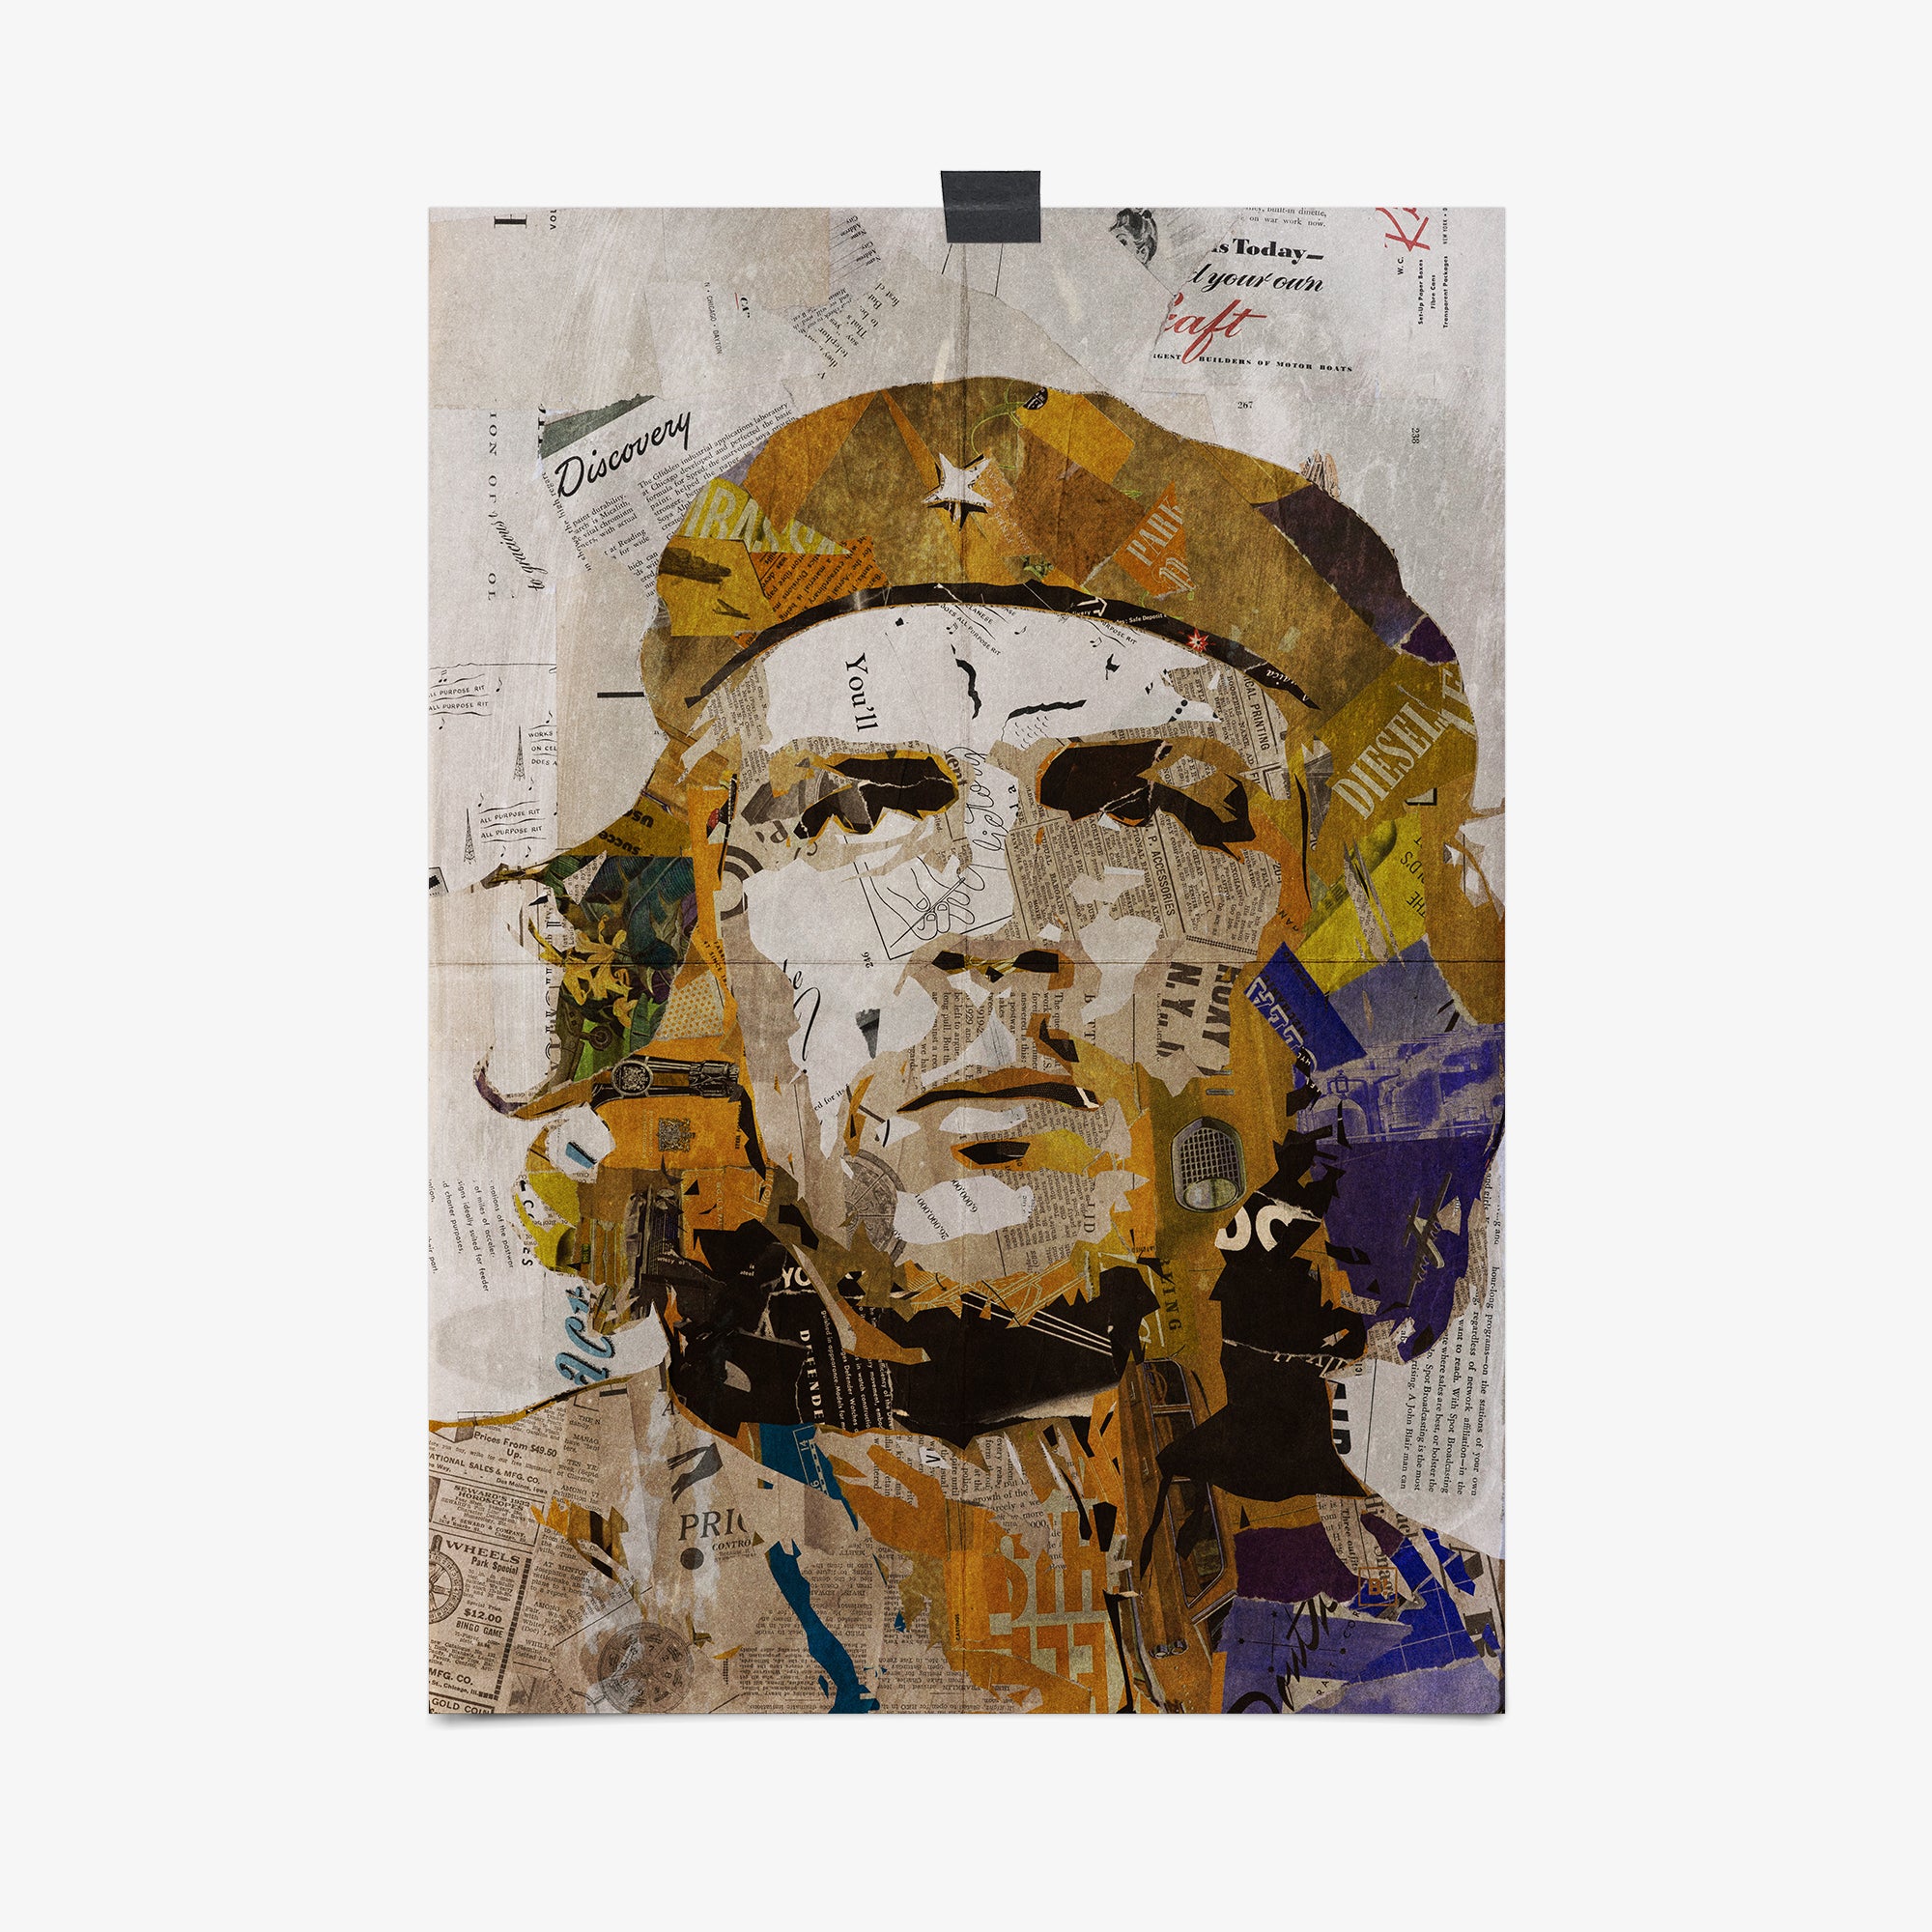 Be inspired by our iconic collage portrait art print of Che Guevara. This artwork was printed using the giclée process on archival acid-free paper, capturing its timeless beauty in every detail.